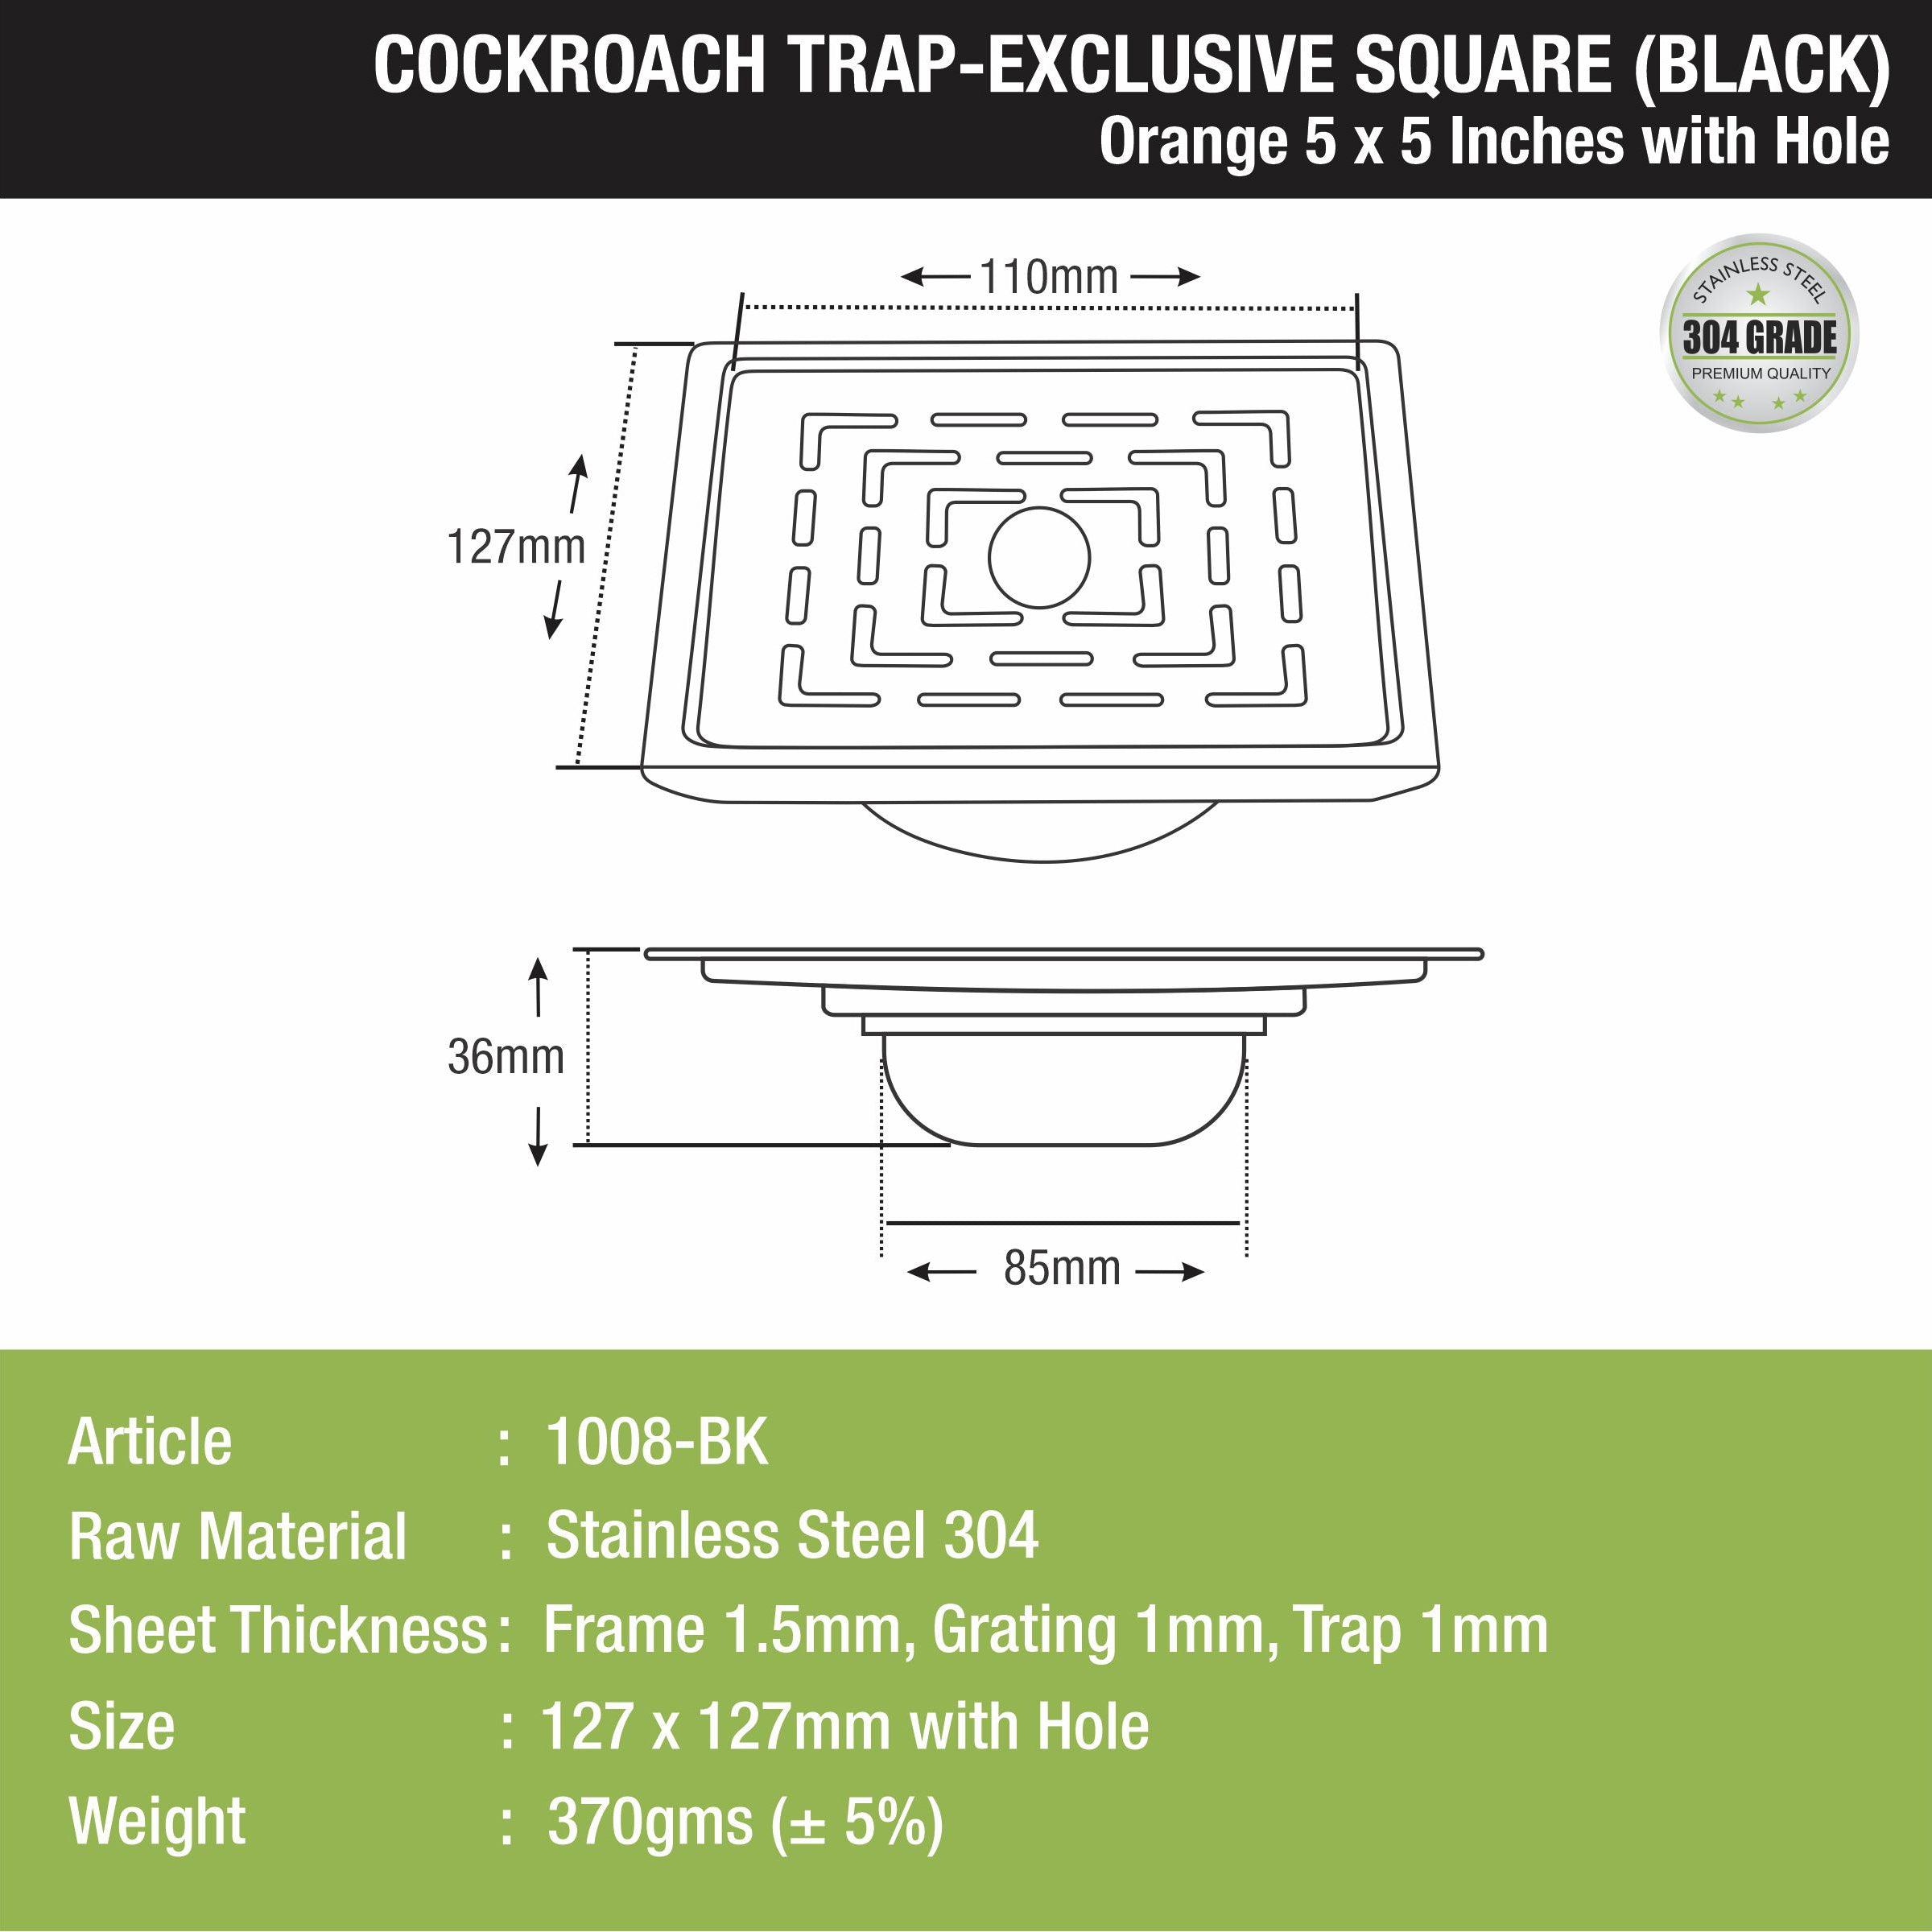 Orange Exclusive Square Floor Drain in Black PVD Coating (5 x 5 Inches) with Hole & Cockroach Trap size and measurement 